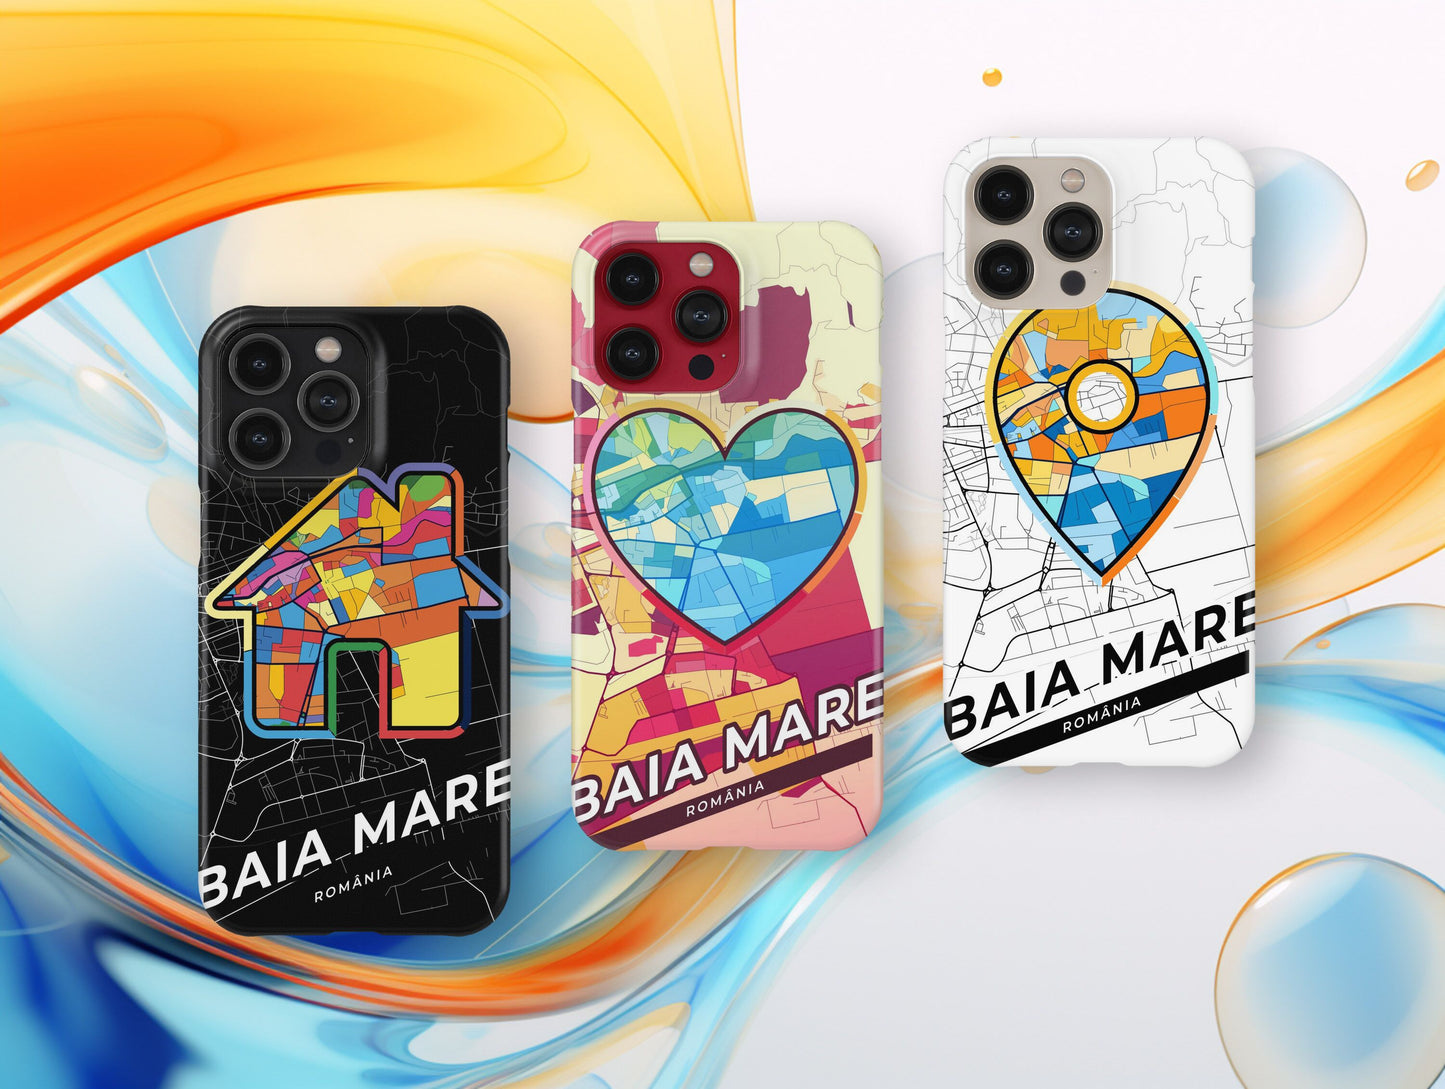 Baia Mare Romania slim phone case with colorful icon. Birthday, wedding or housewarming gift. Couple match cases.